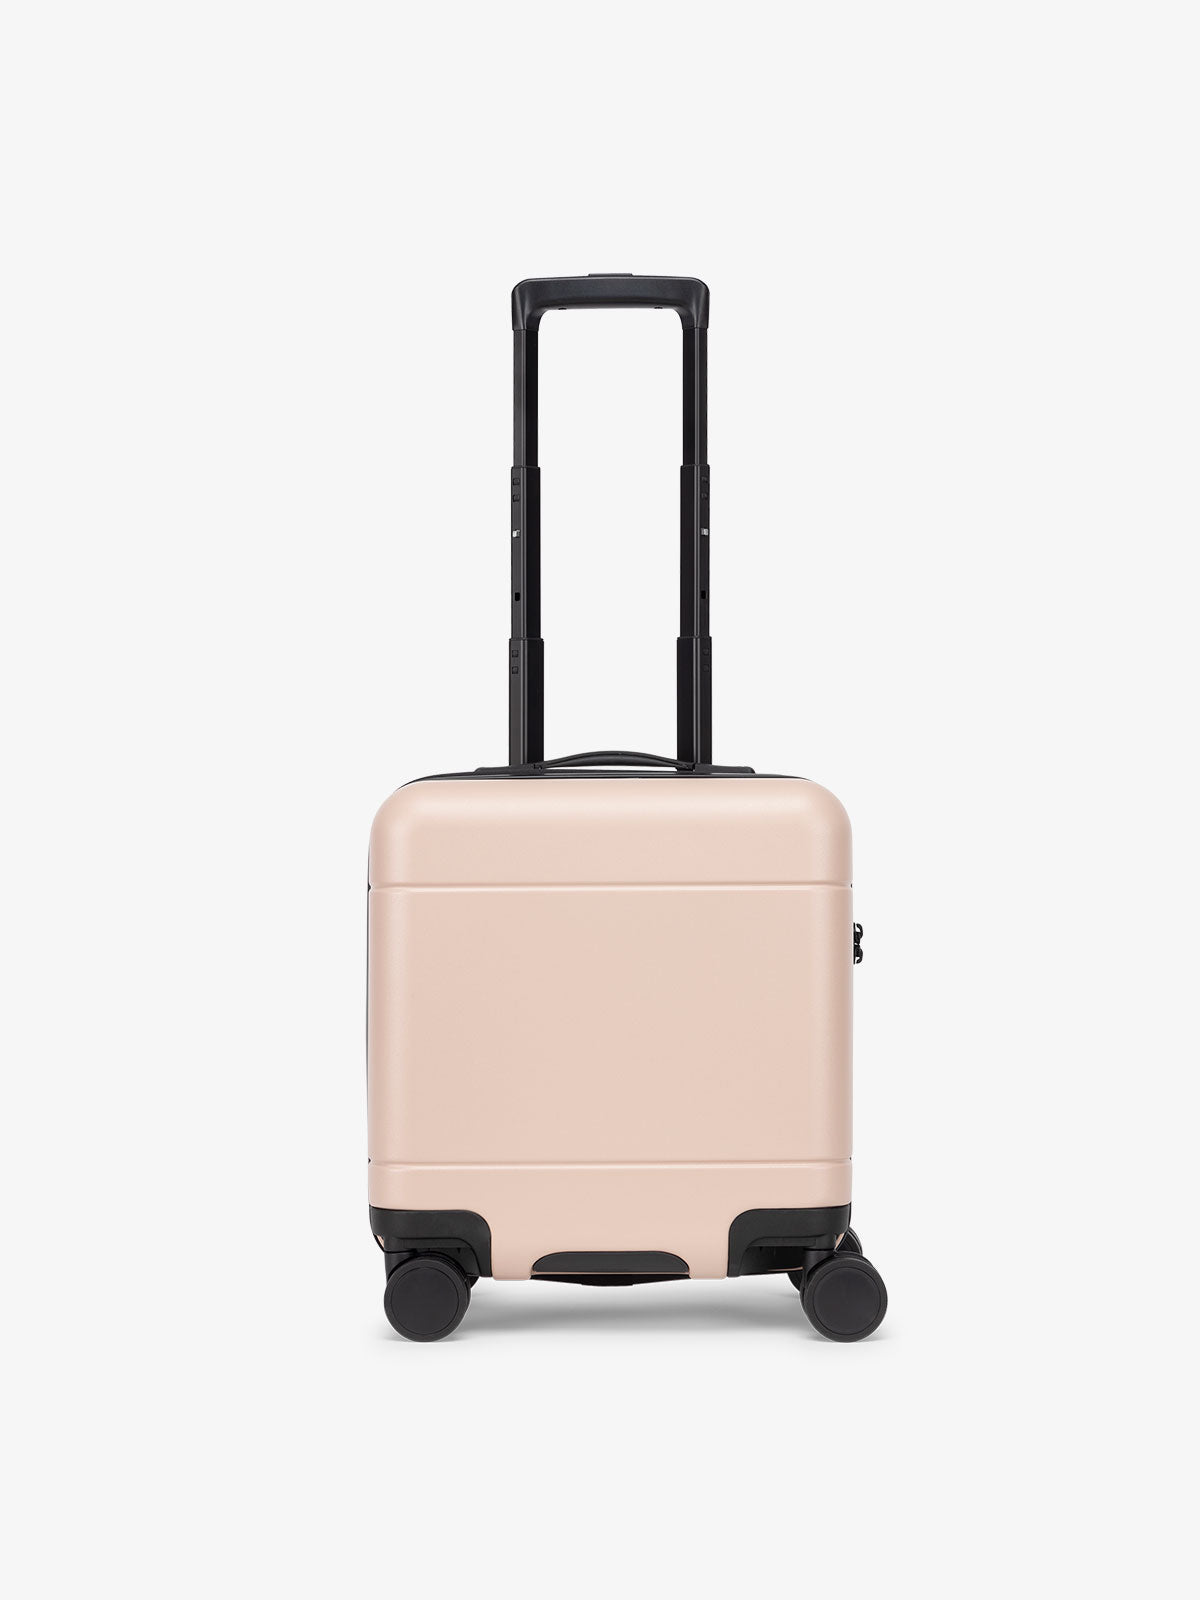 Hue mini carry on luggage in pink sand